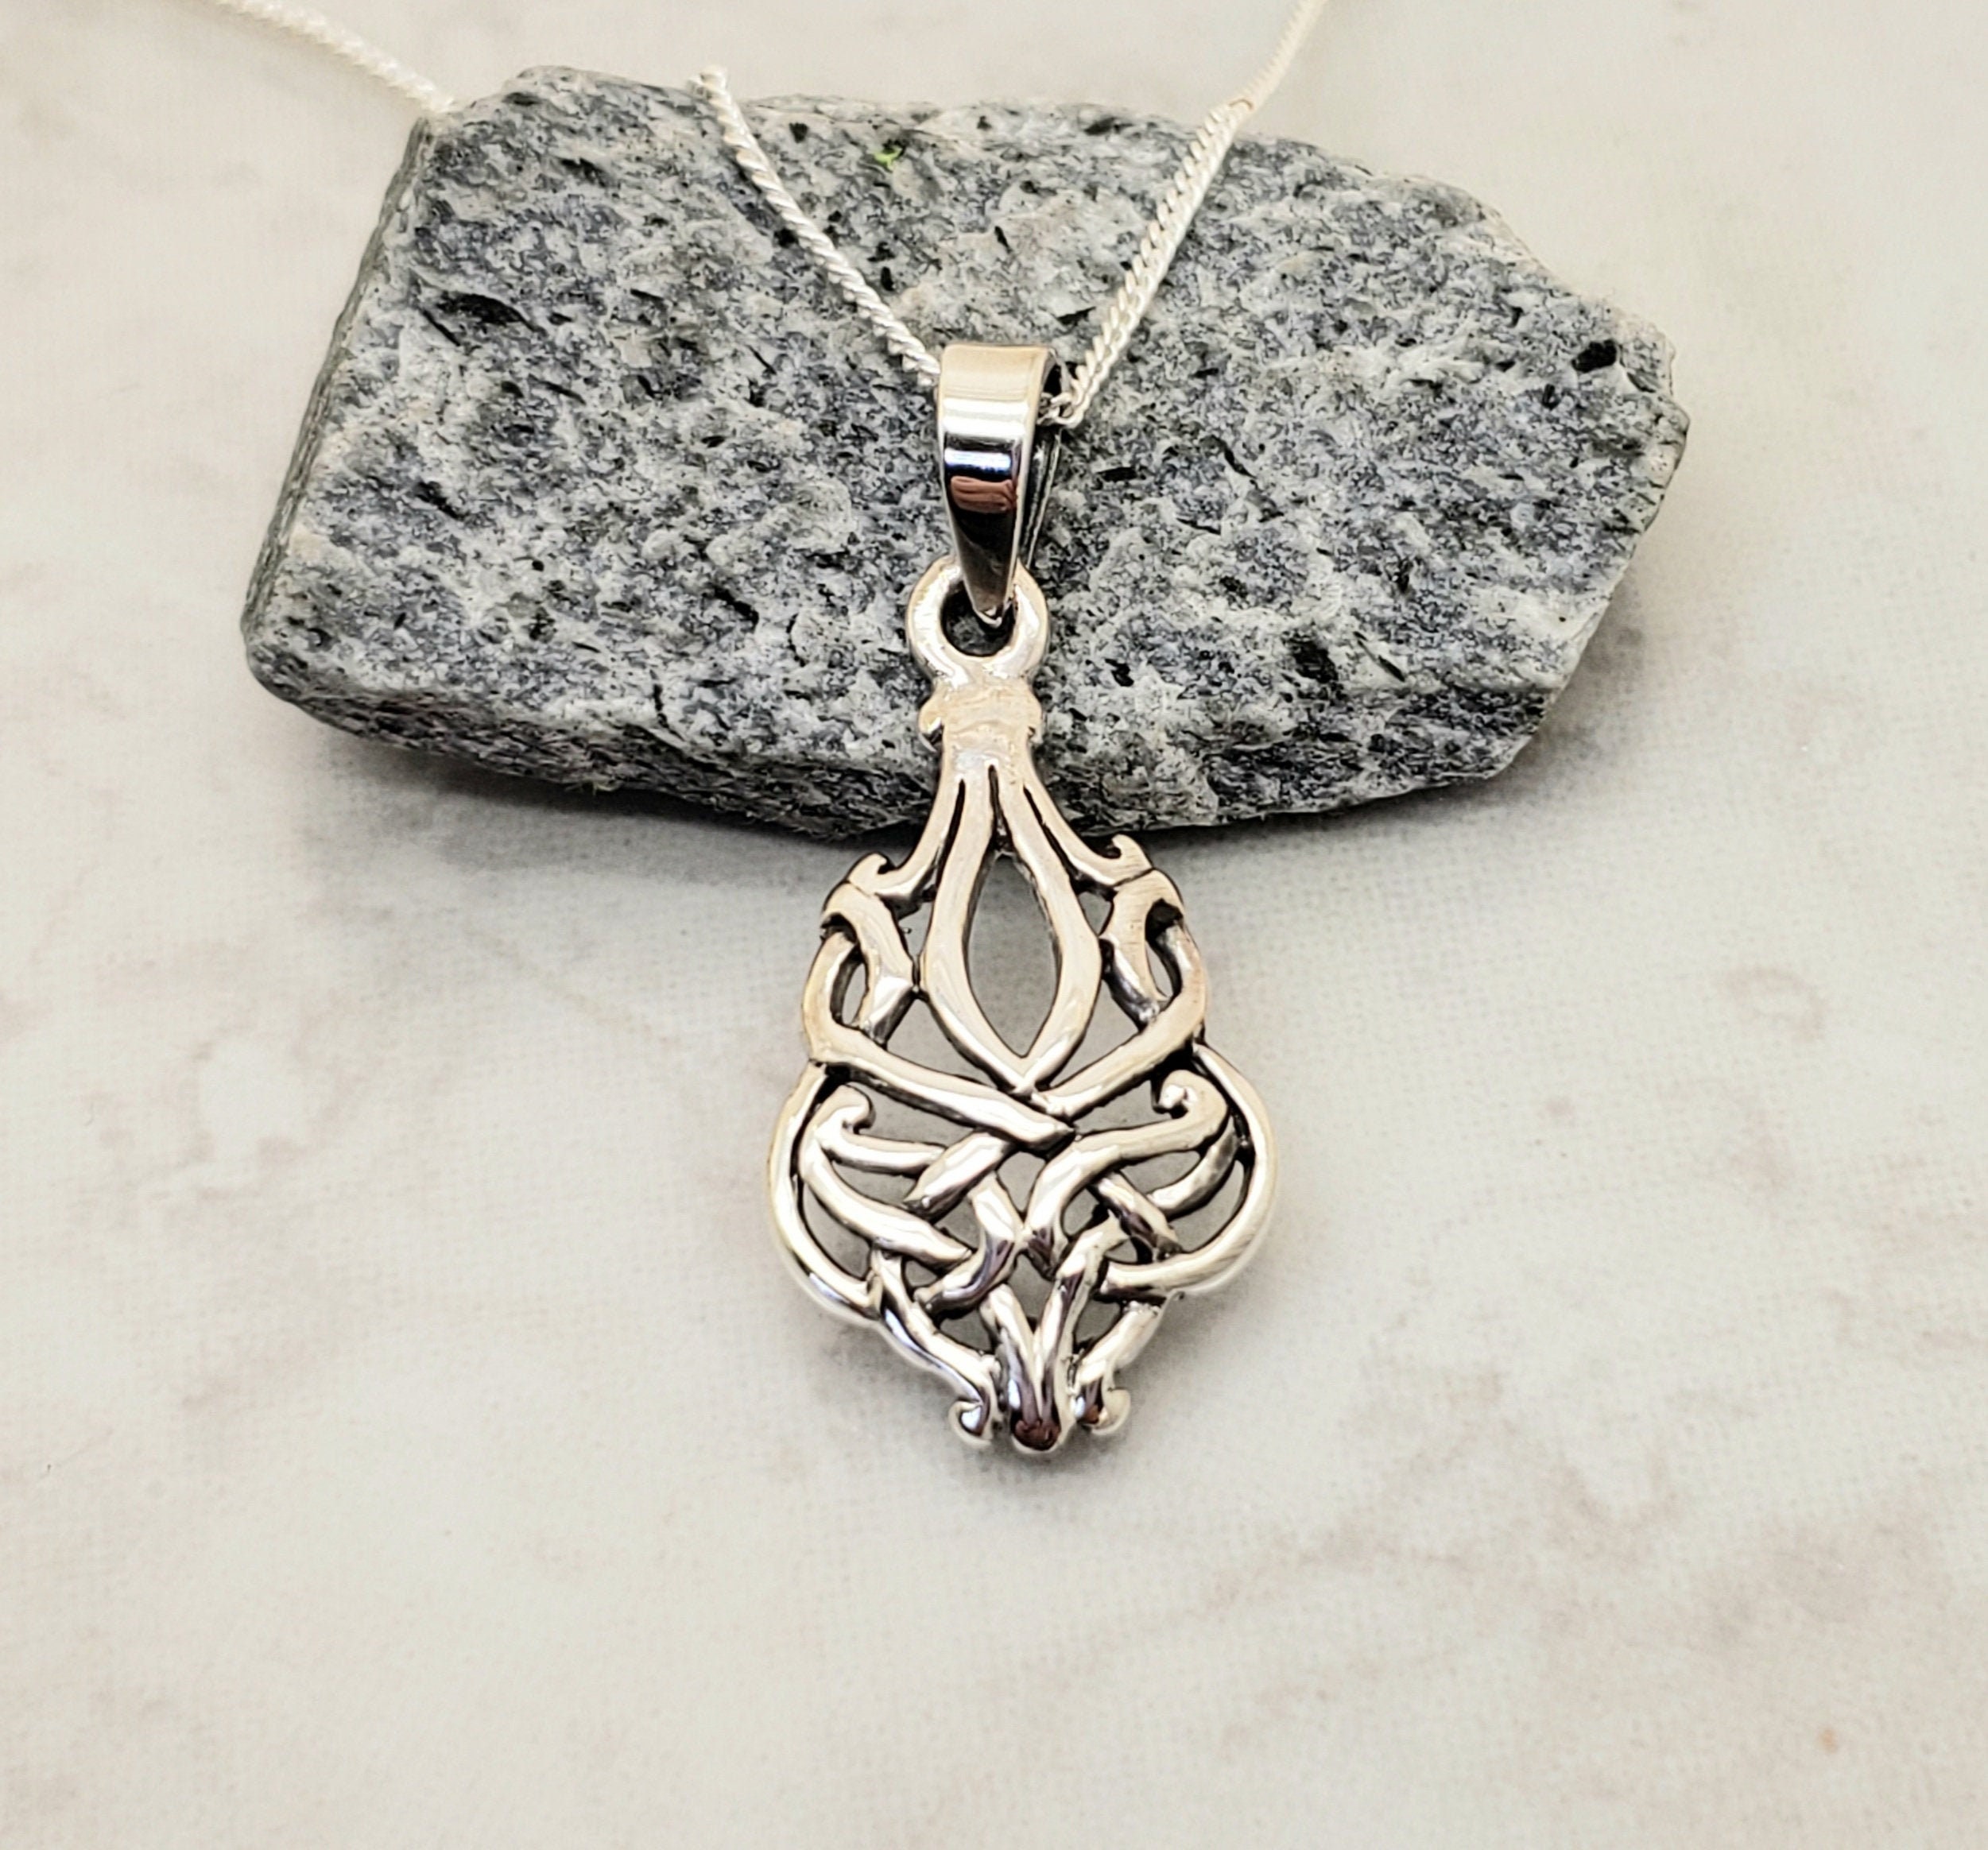 Silver Friendship Knot Pendant Necklace | New Look